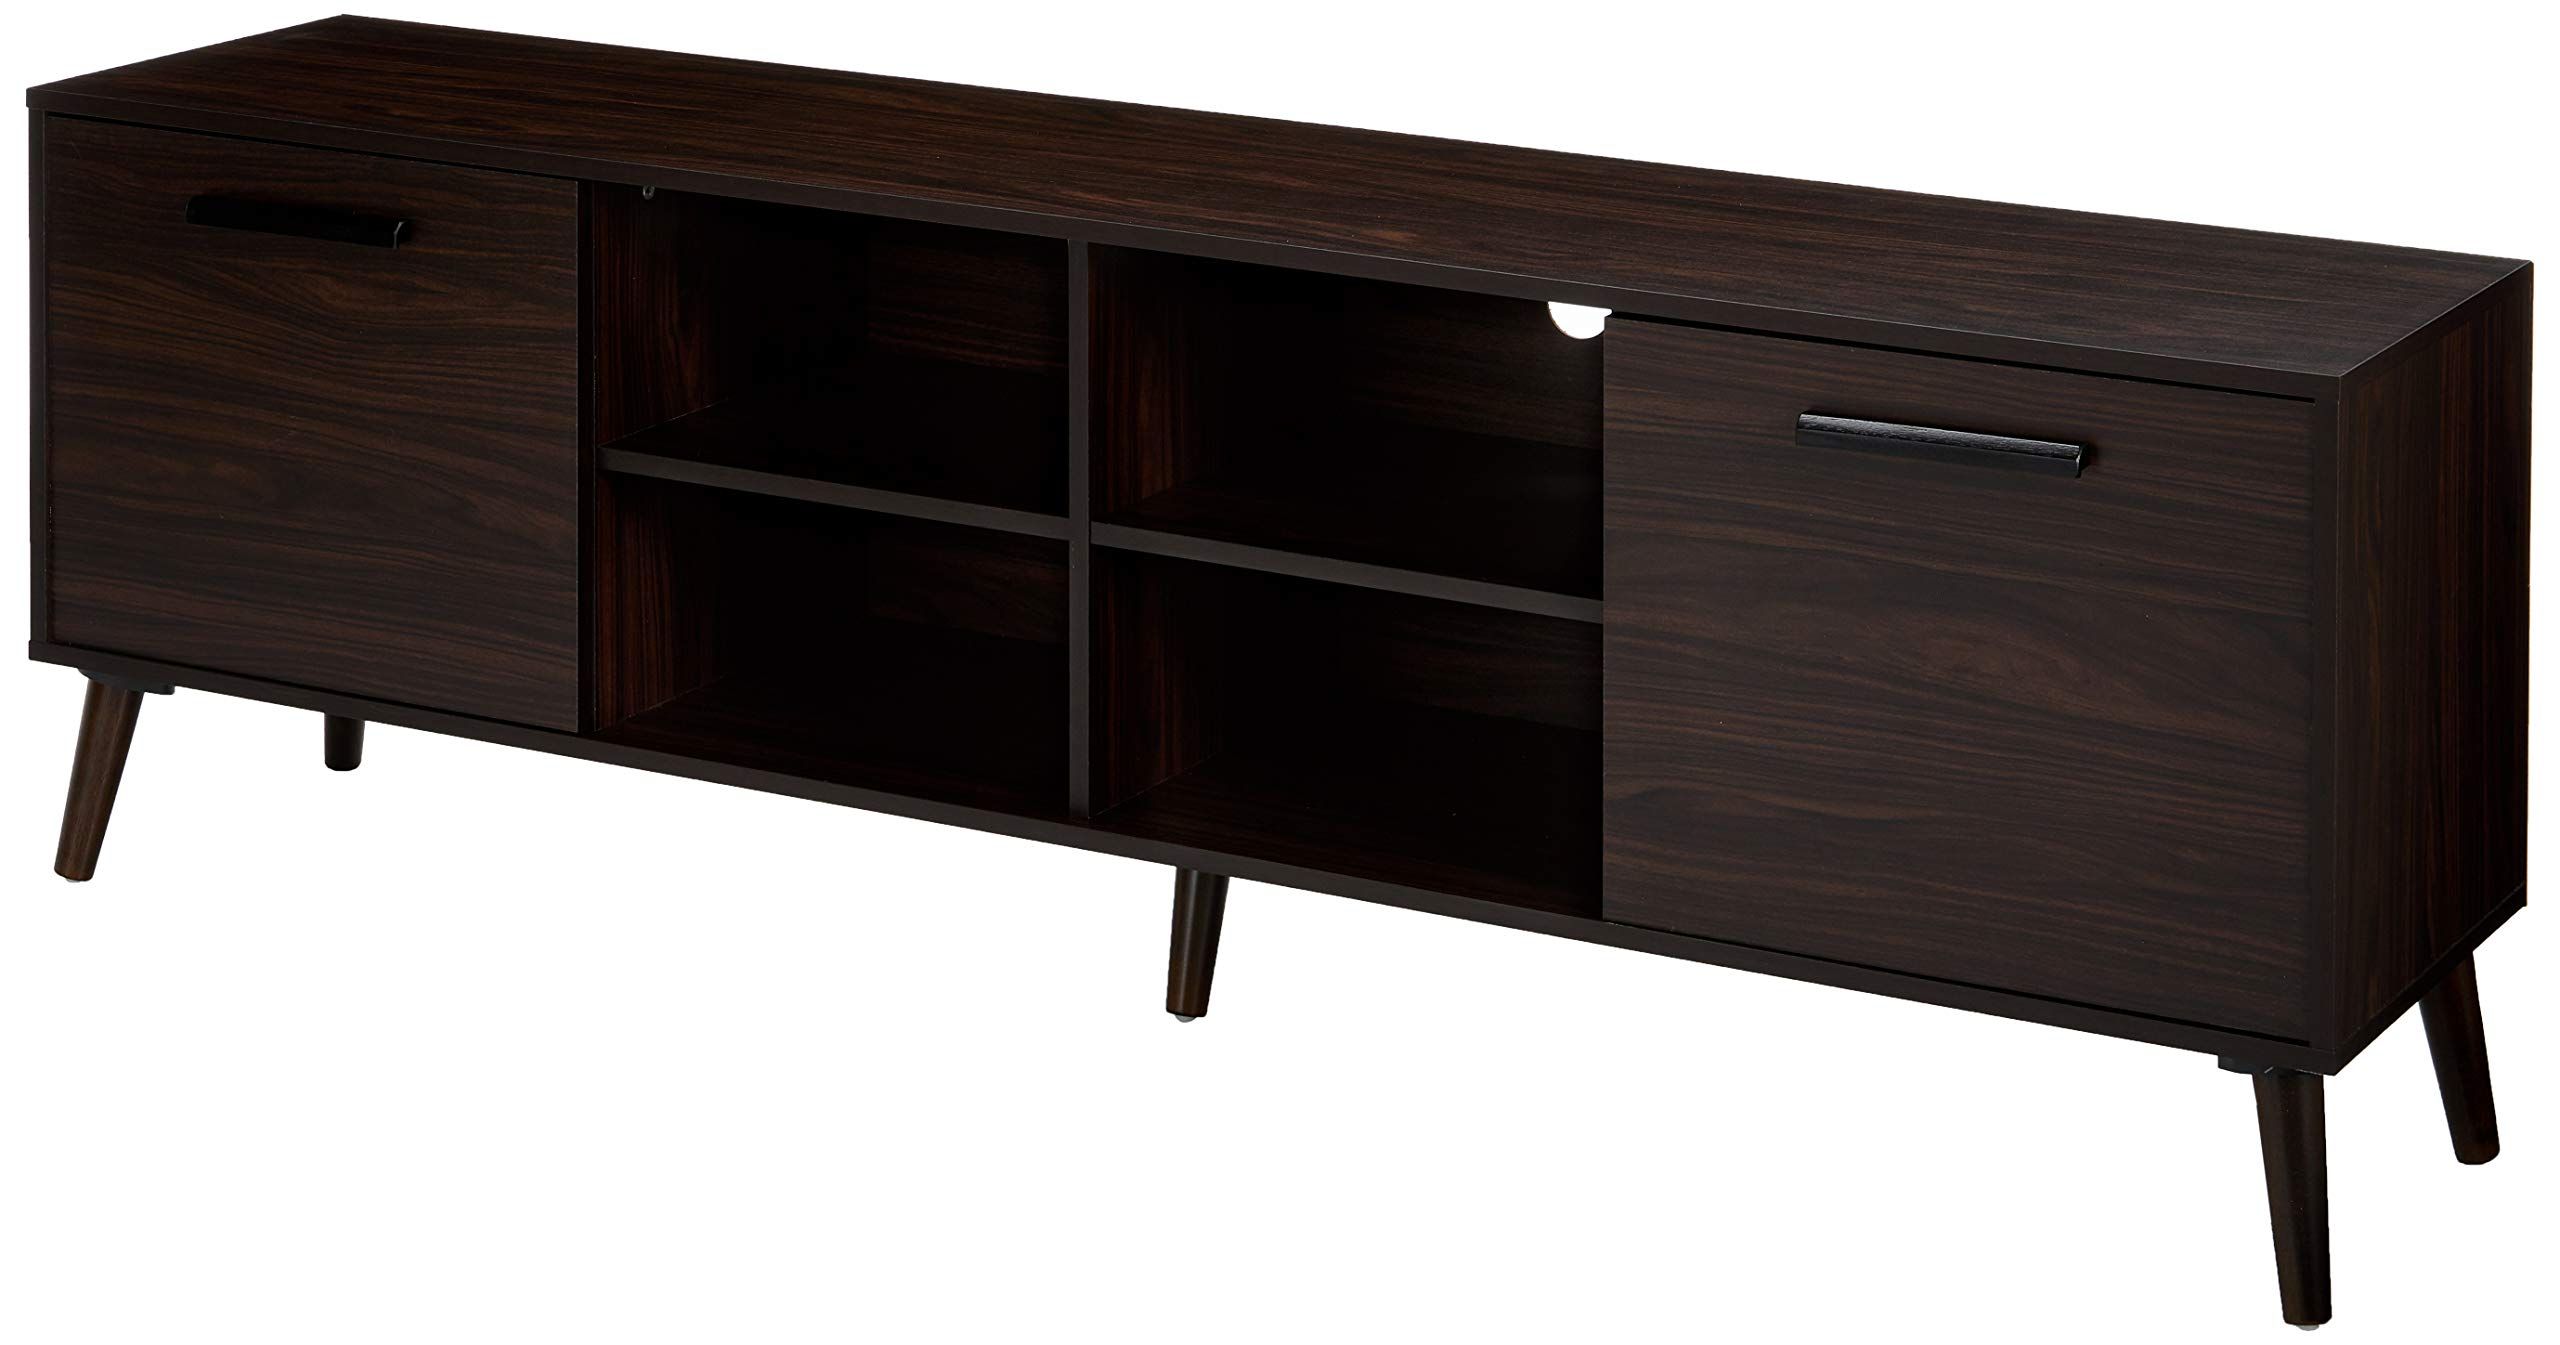 Faux Wood Tv Stands Throughout Latest Amazon: Christopher Knight Home Dontae Mid Century Modern Faux Wood  Overlay Tv Stand, Dark Walnut : Home & Kitchen (View 9 of 10)